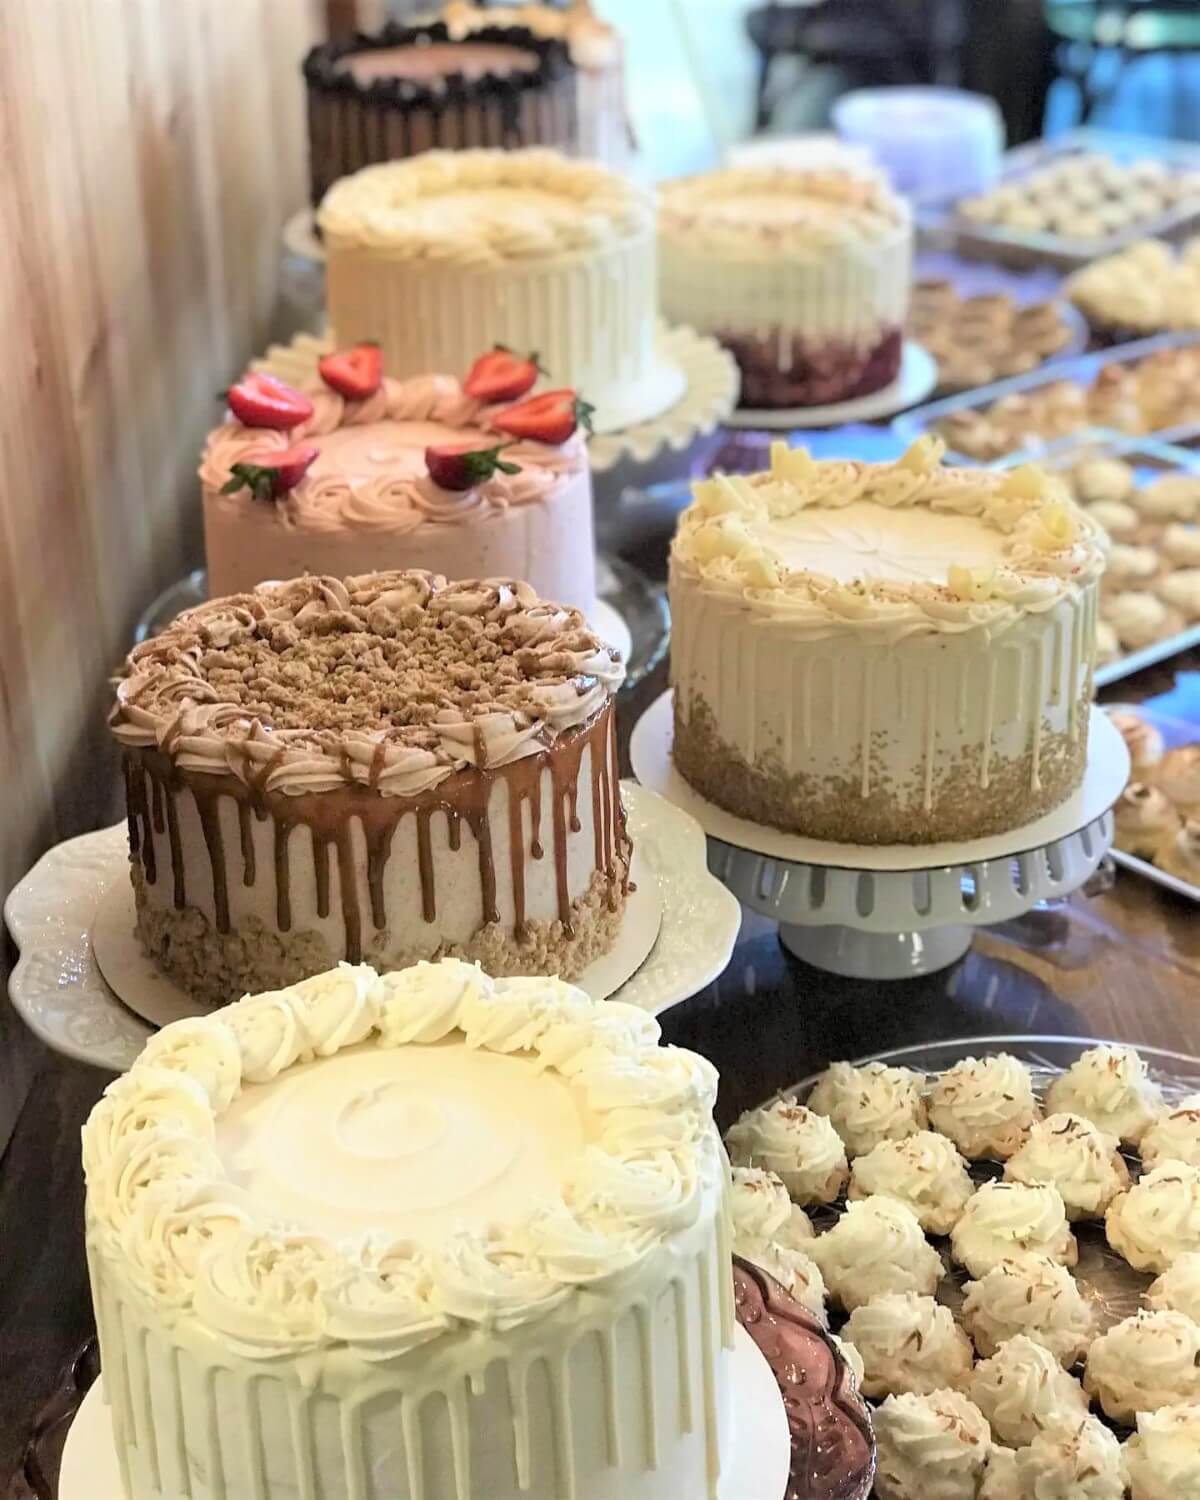 A dessert table filled with bakery-style cakes and pastries